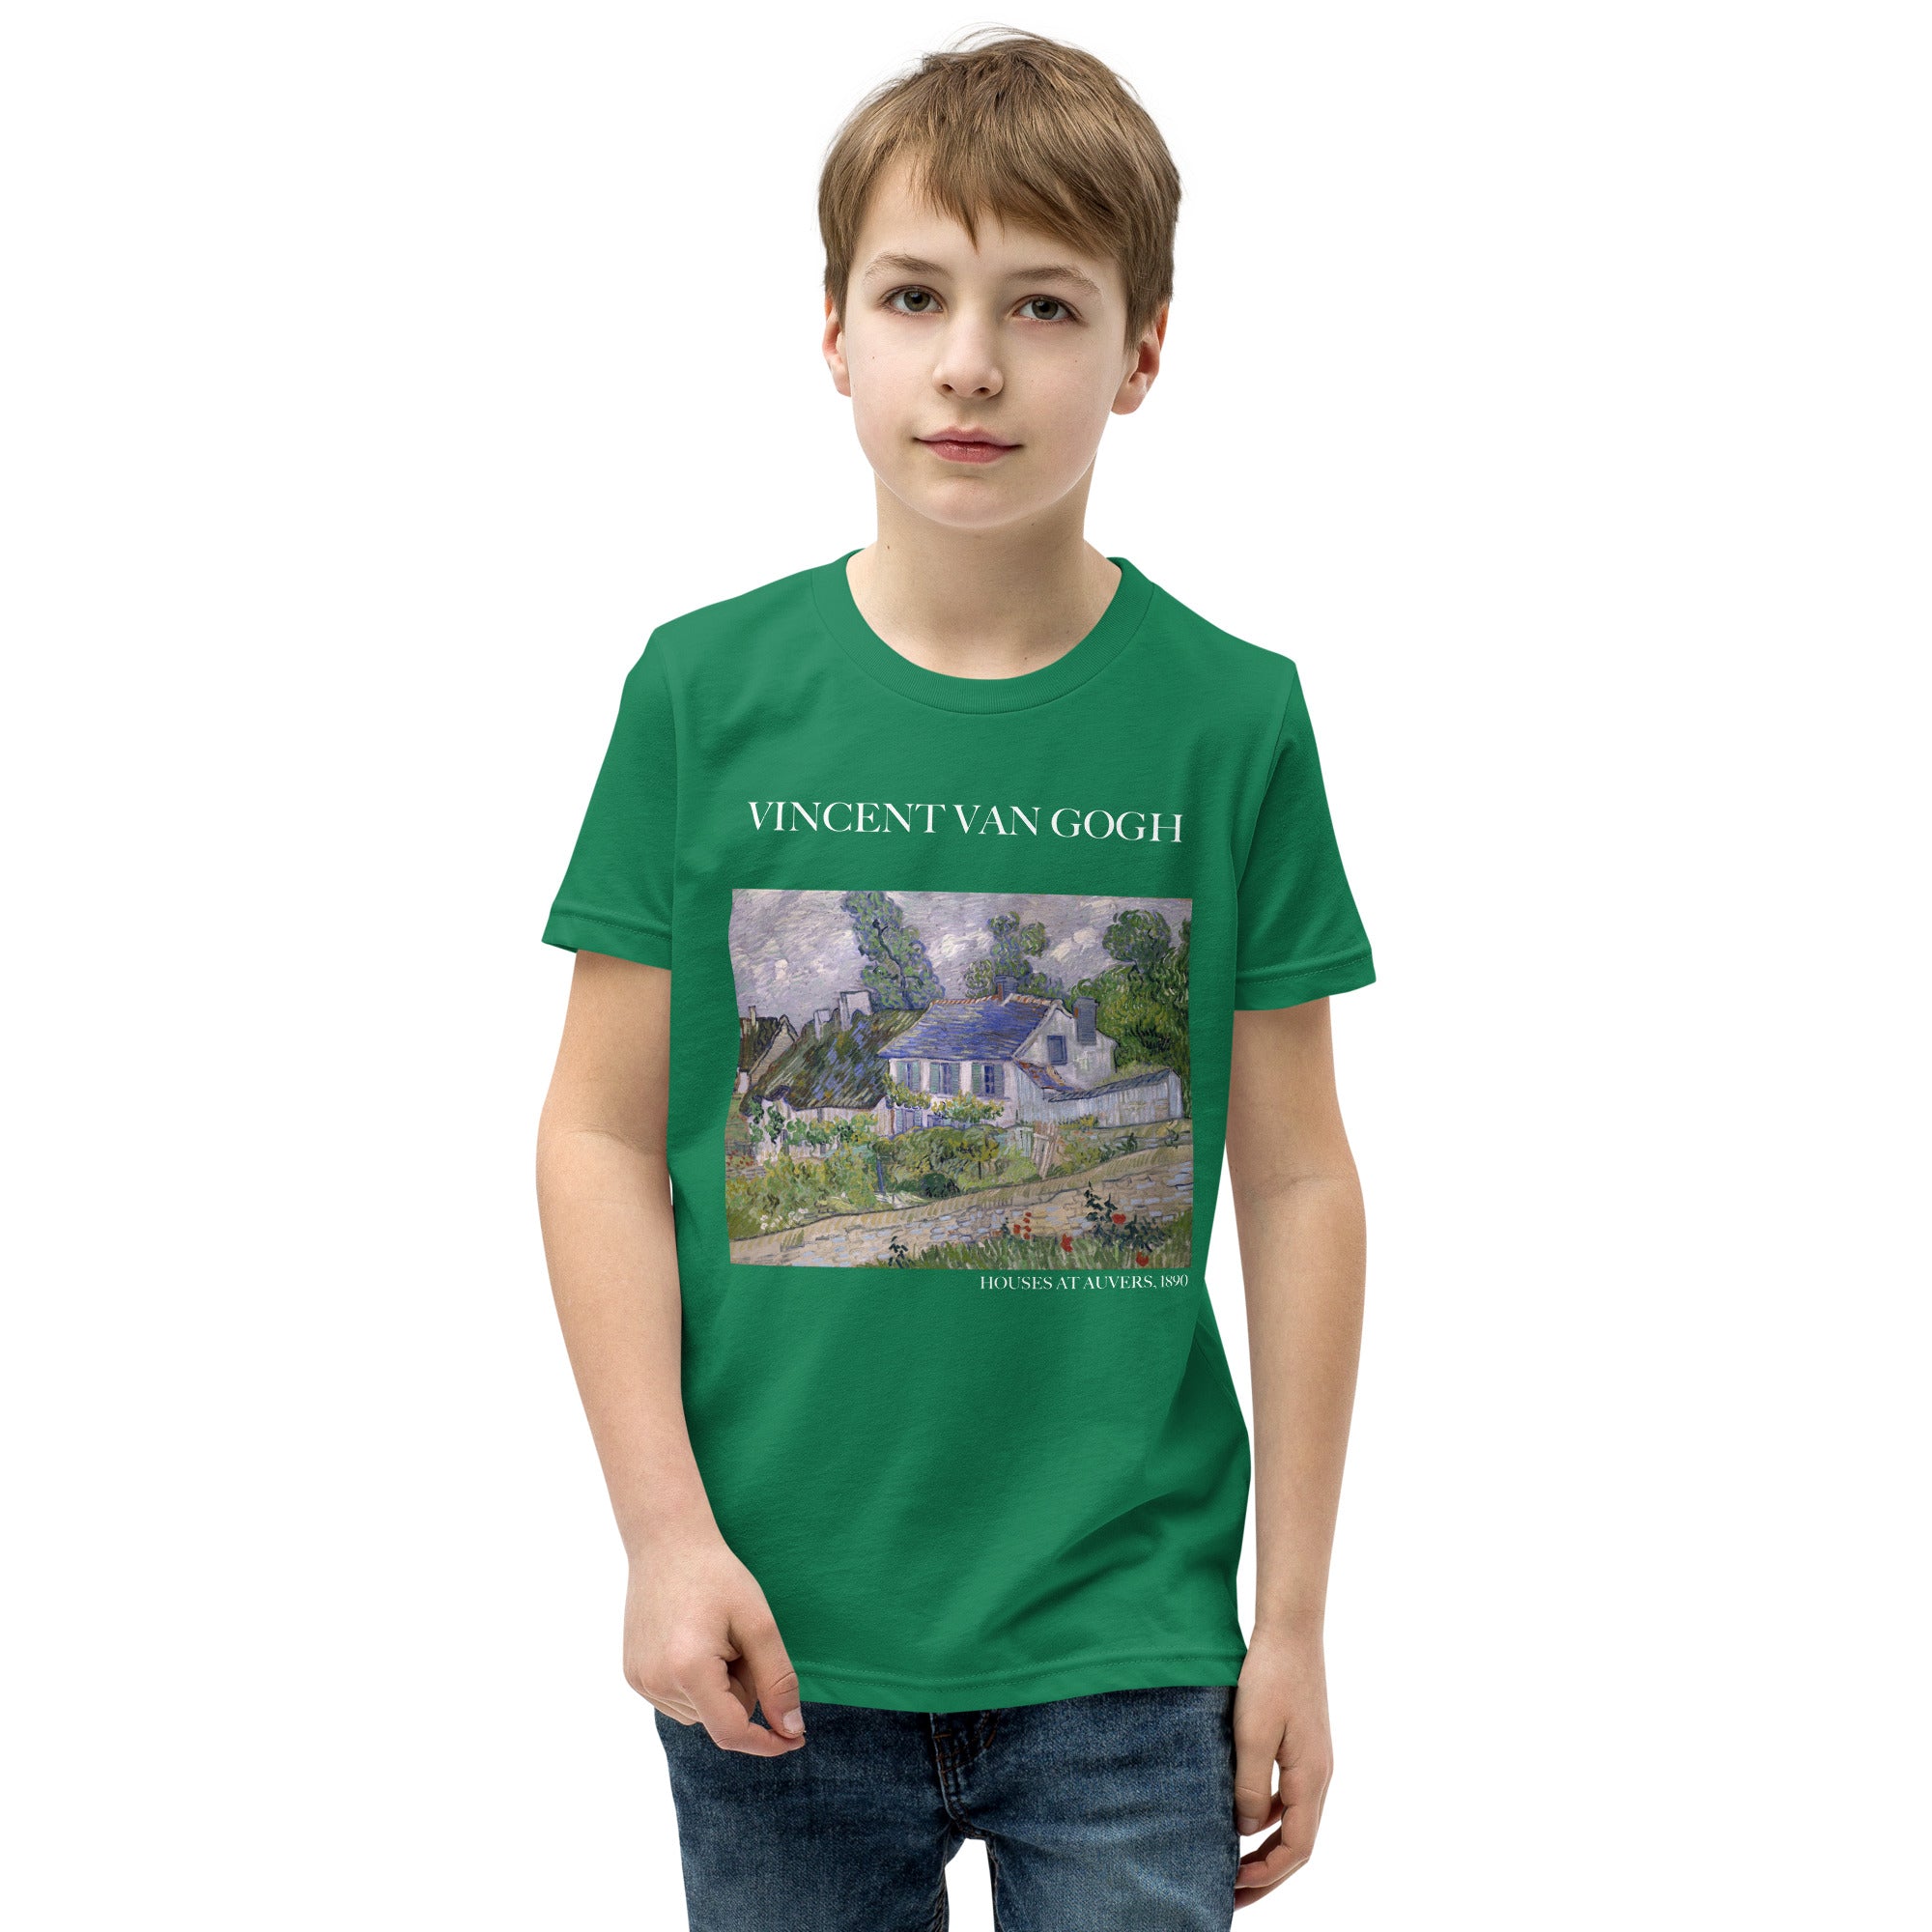 Vincent van Gogh 'Houses at Auvers' Famous Painting Short Sleeve T-Shirt | Premium Youth Art Tee